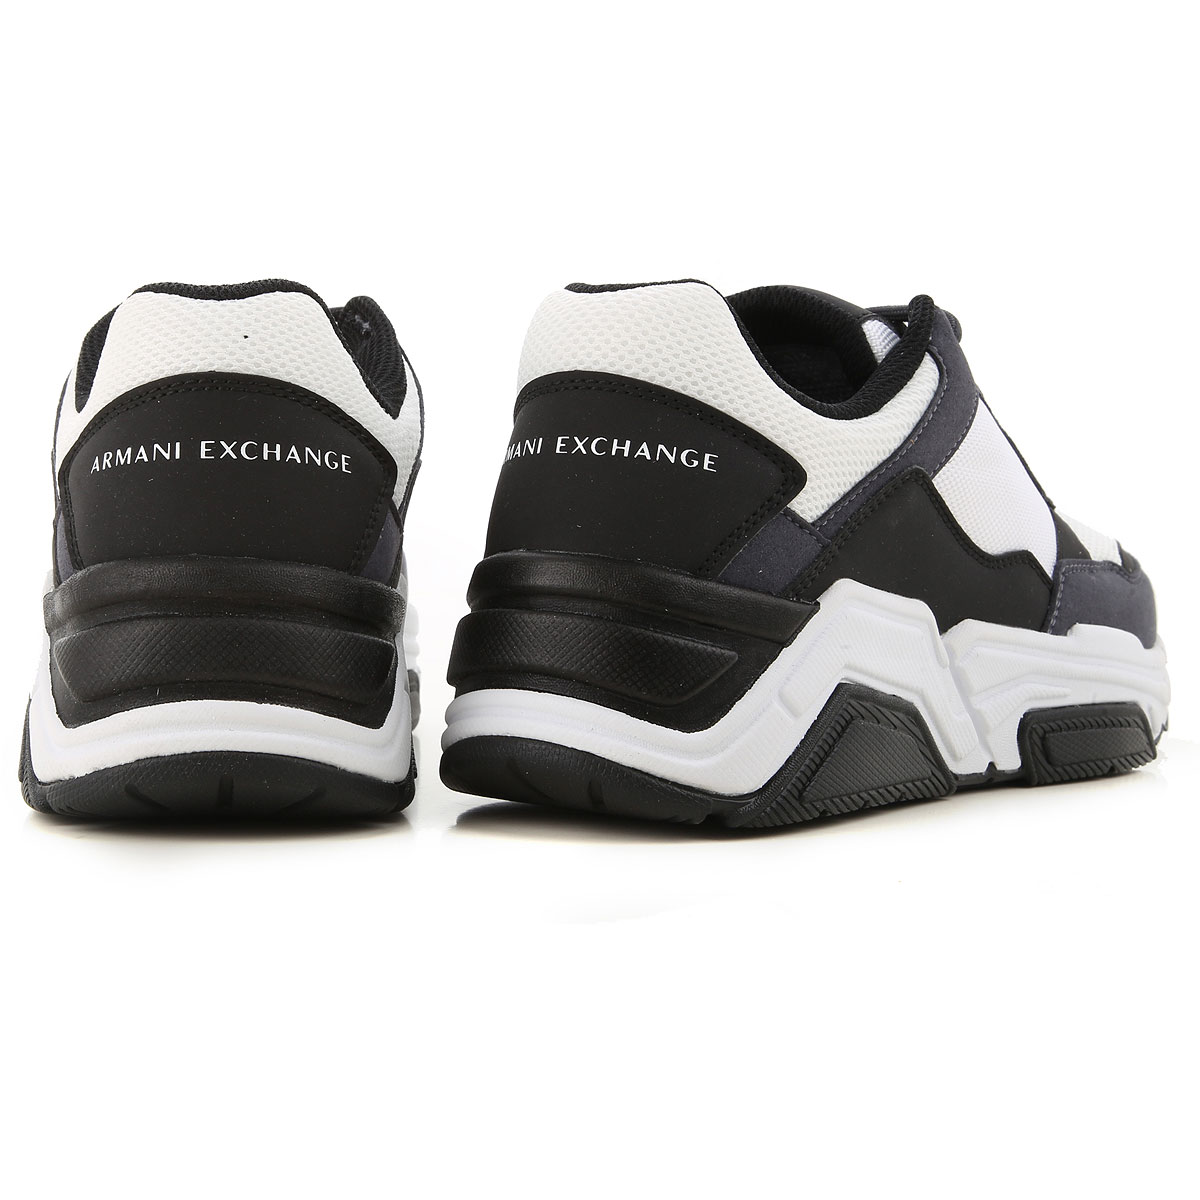 Mens Shoes Armani Exchange, Style code 